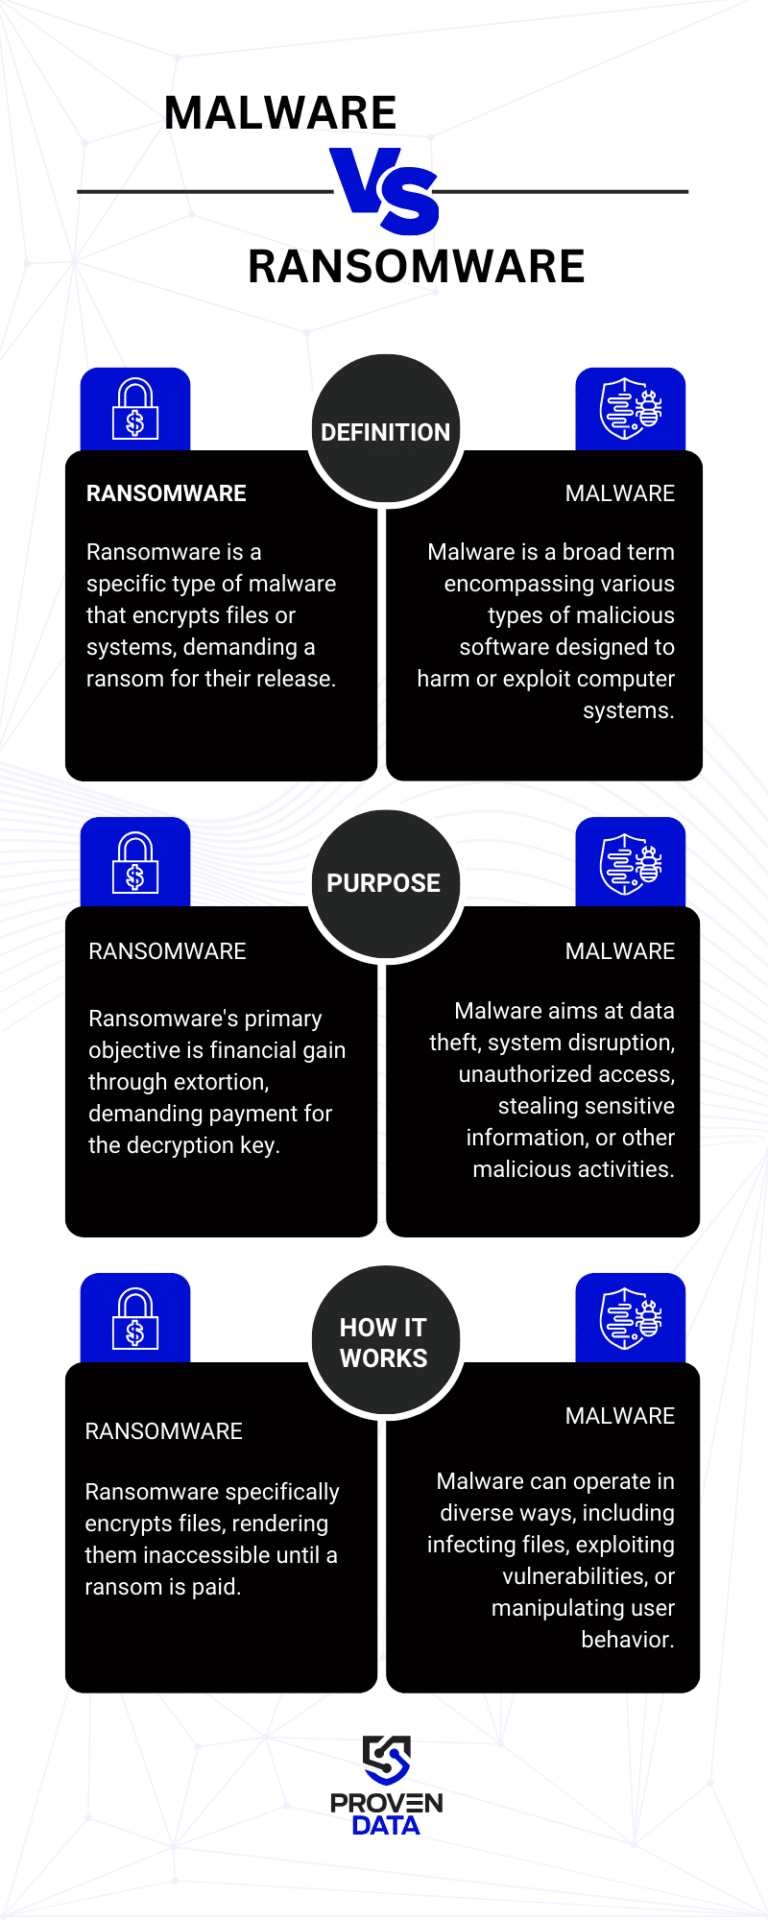 Malware vs Ransomware infographic: The main difference between ransomware and malware is that while ransomware is a specific type of cyberattack, malware is an umbrella term for several types of attacks. Malware's general purpose is to disrupt business services or cause data loss. Ransomware adds to this data encryption and ransom payment, showing their monetary motivation.